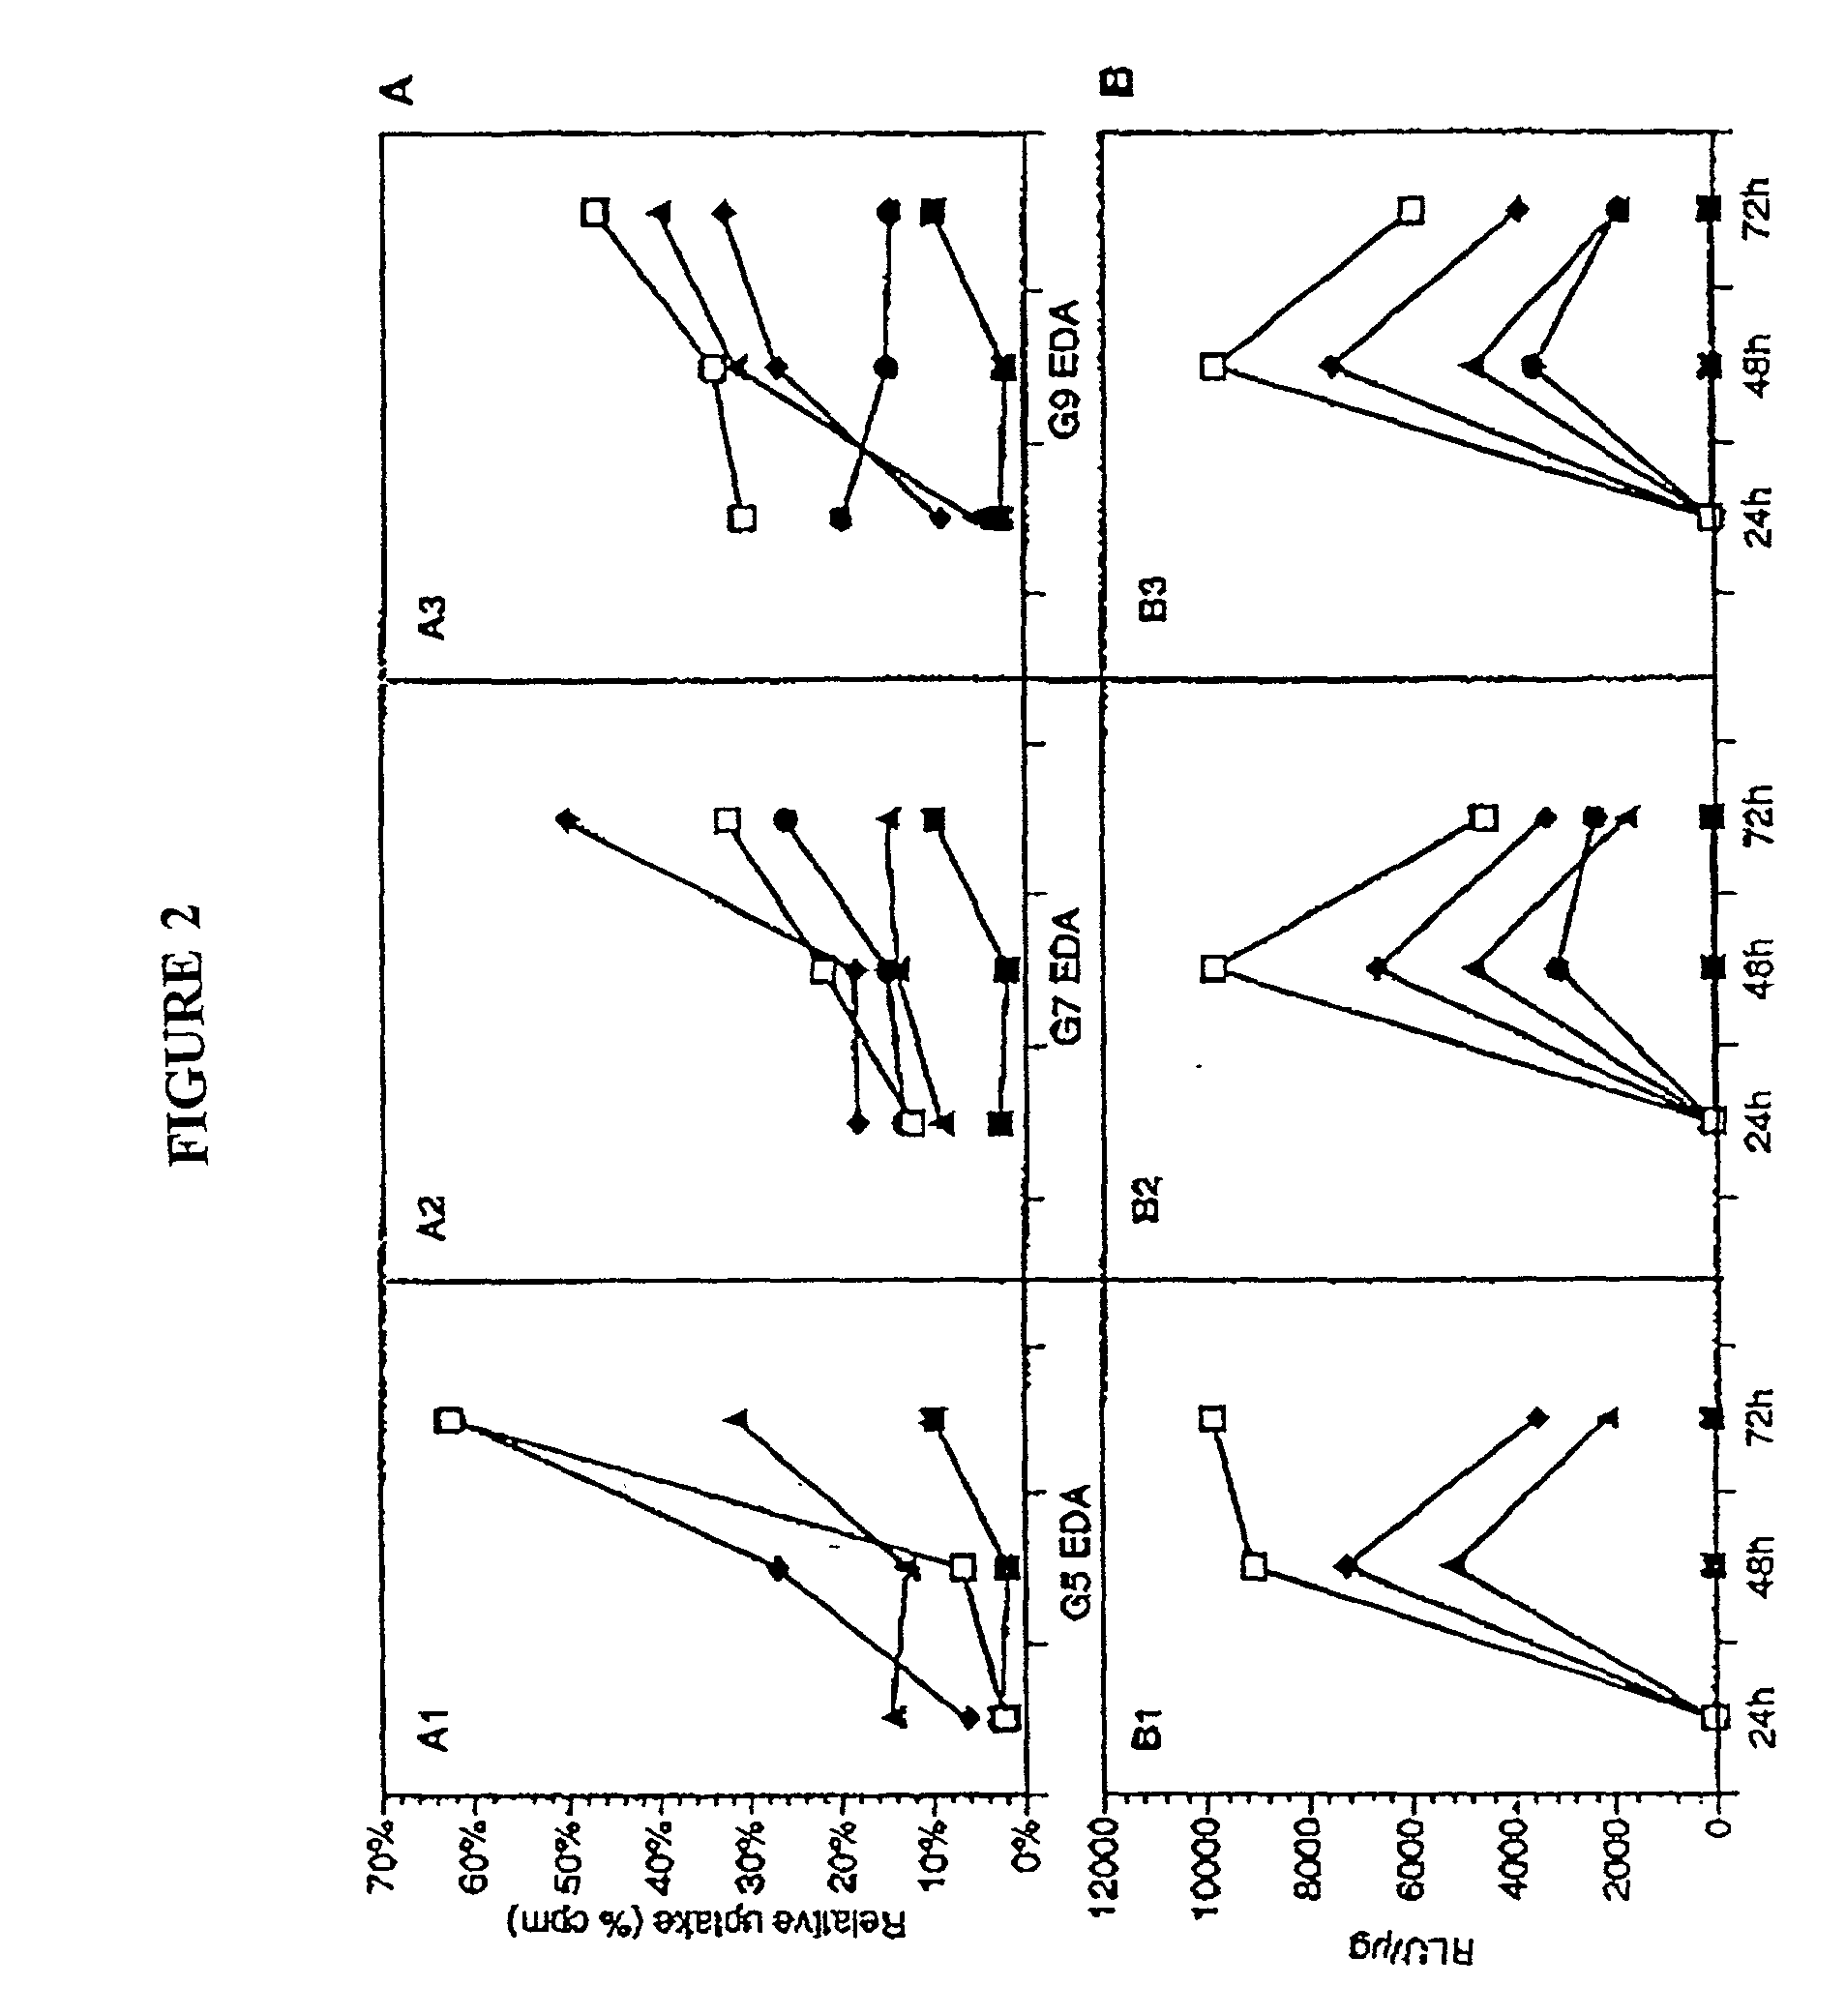 Delivery systems comprising biocompatible and bioerodable membranes